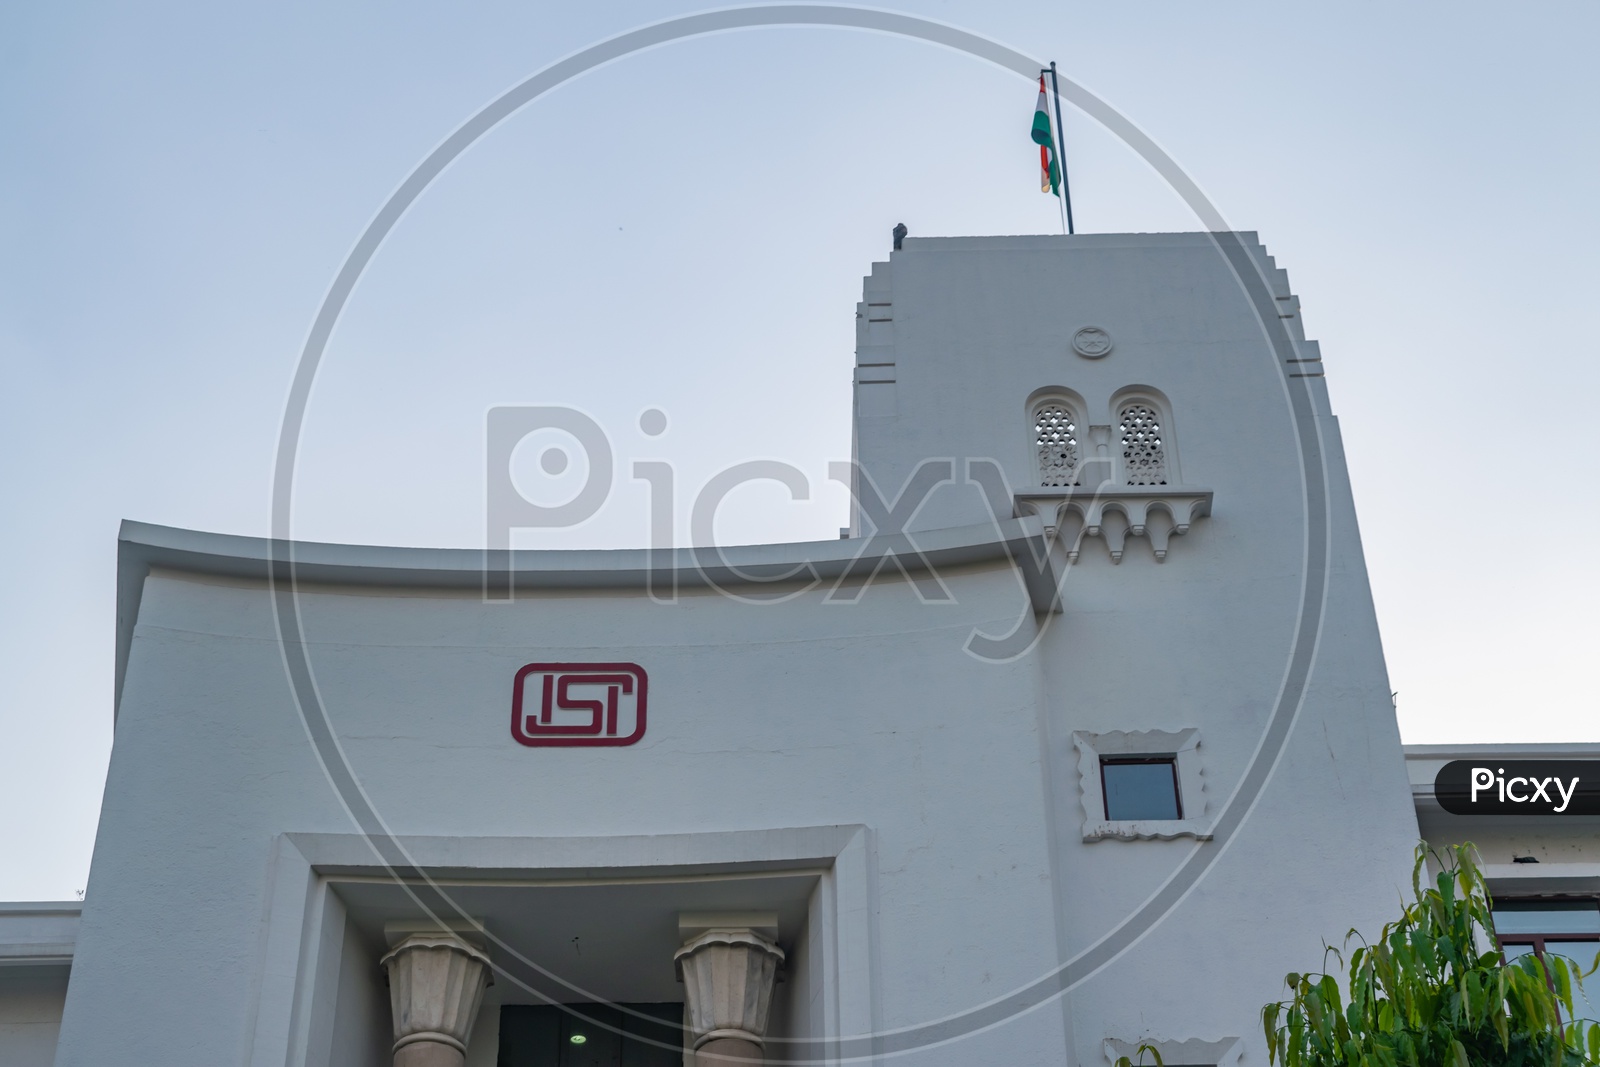 ISI(Indian Standard Institute) now known as BIS (Bureau of Indian Standards)